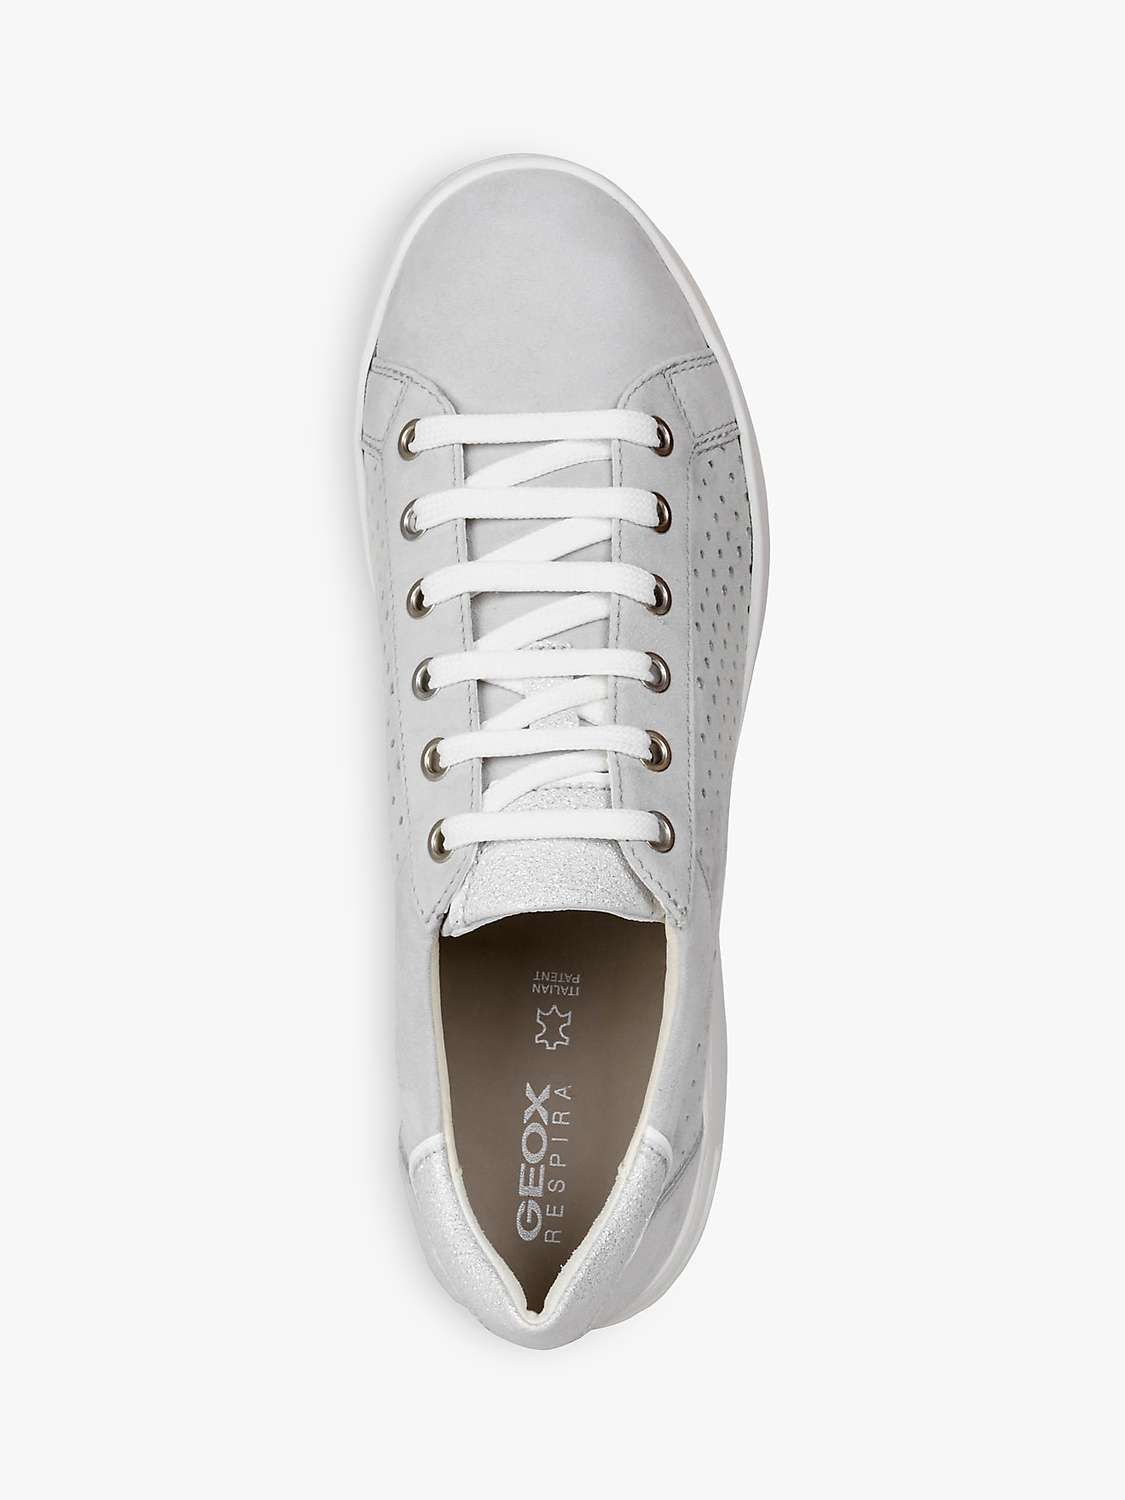 Buy Geox Women's Jaysen Leather Lace Up Trainers Online at johnlewis.com